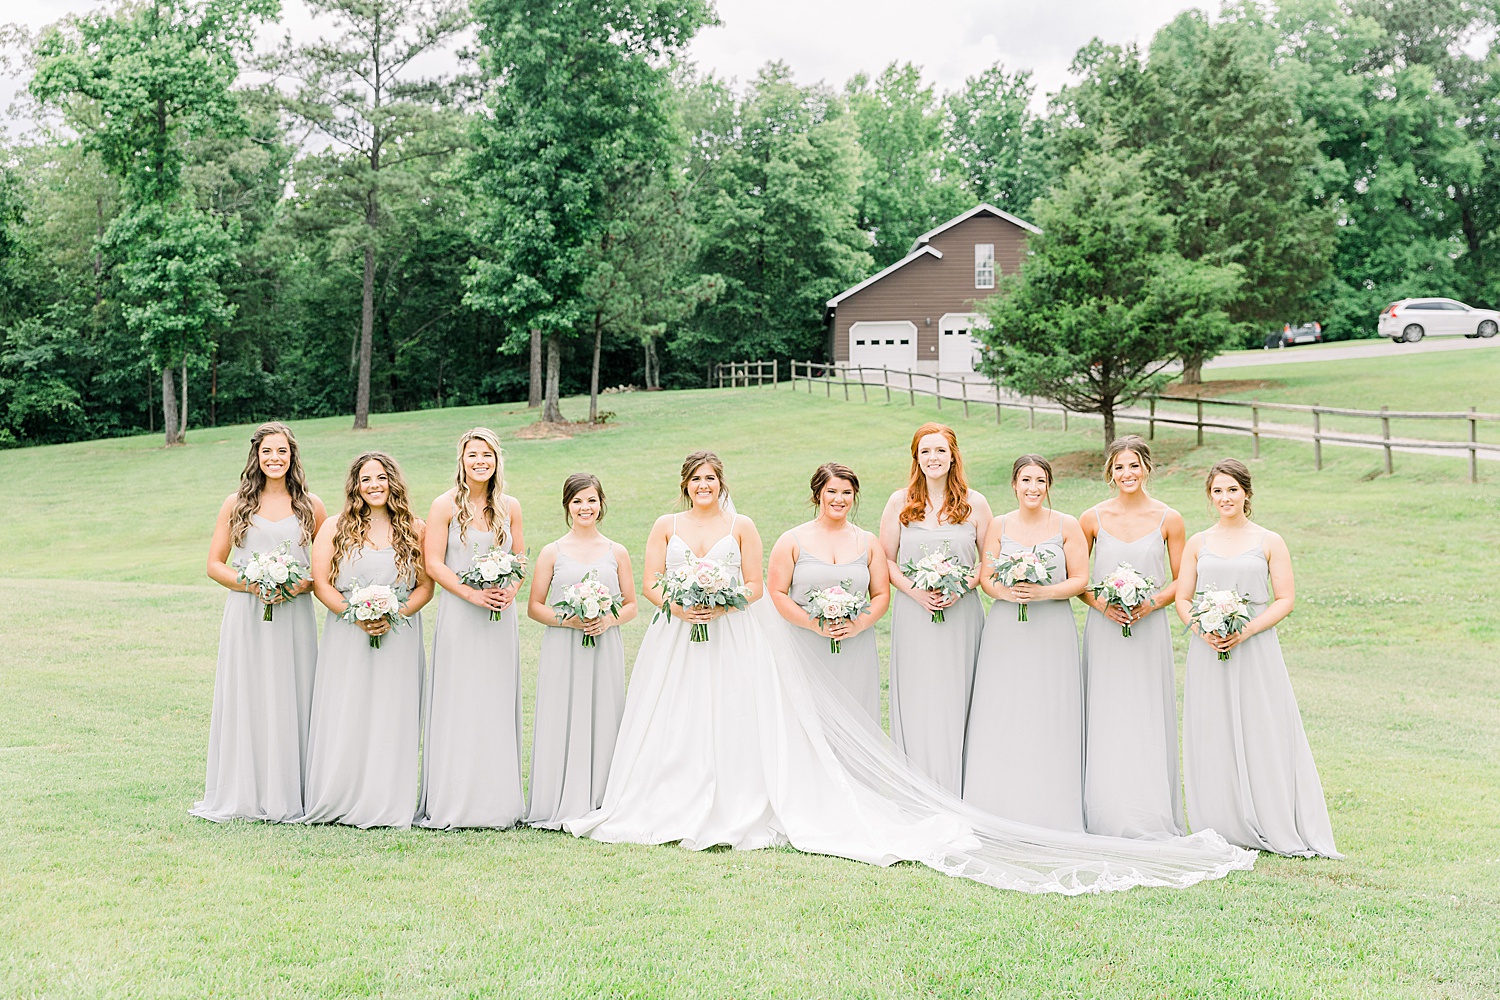 candid moment of bride with bridal party before AL wedding ceremony captured by Chelsea Morton Photography